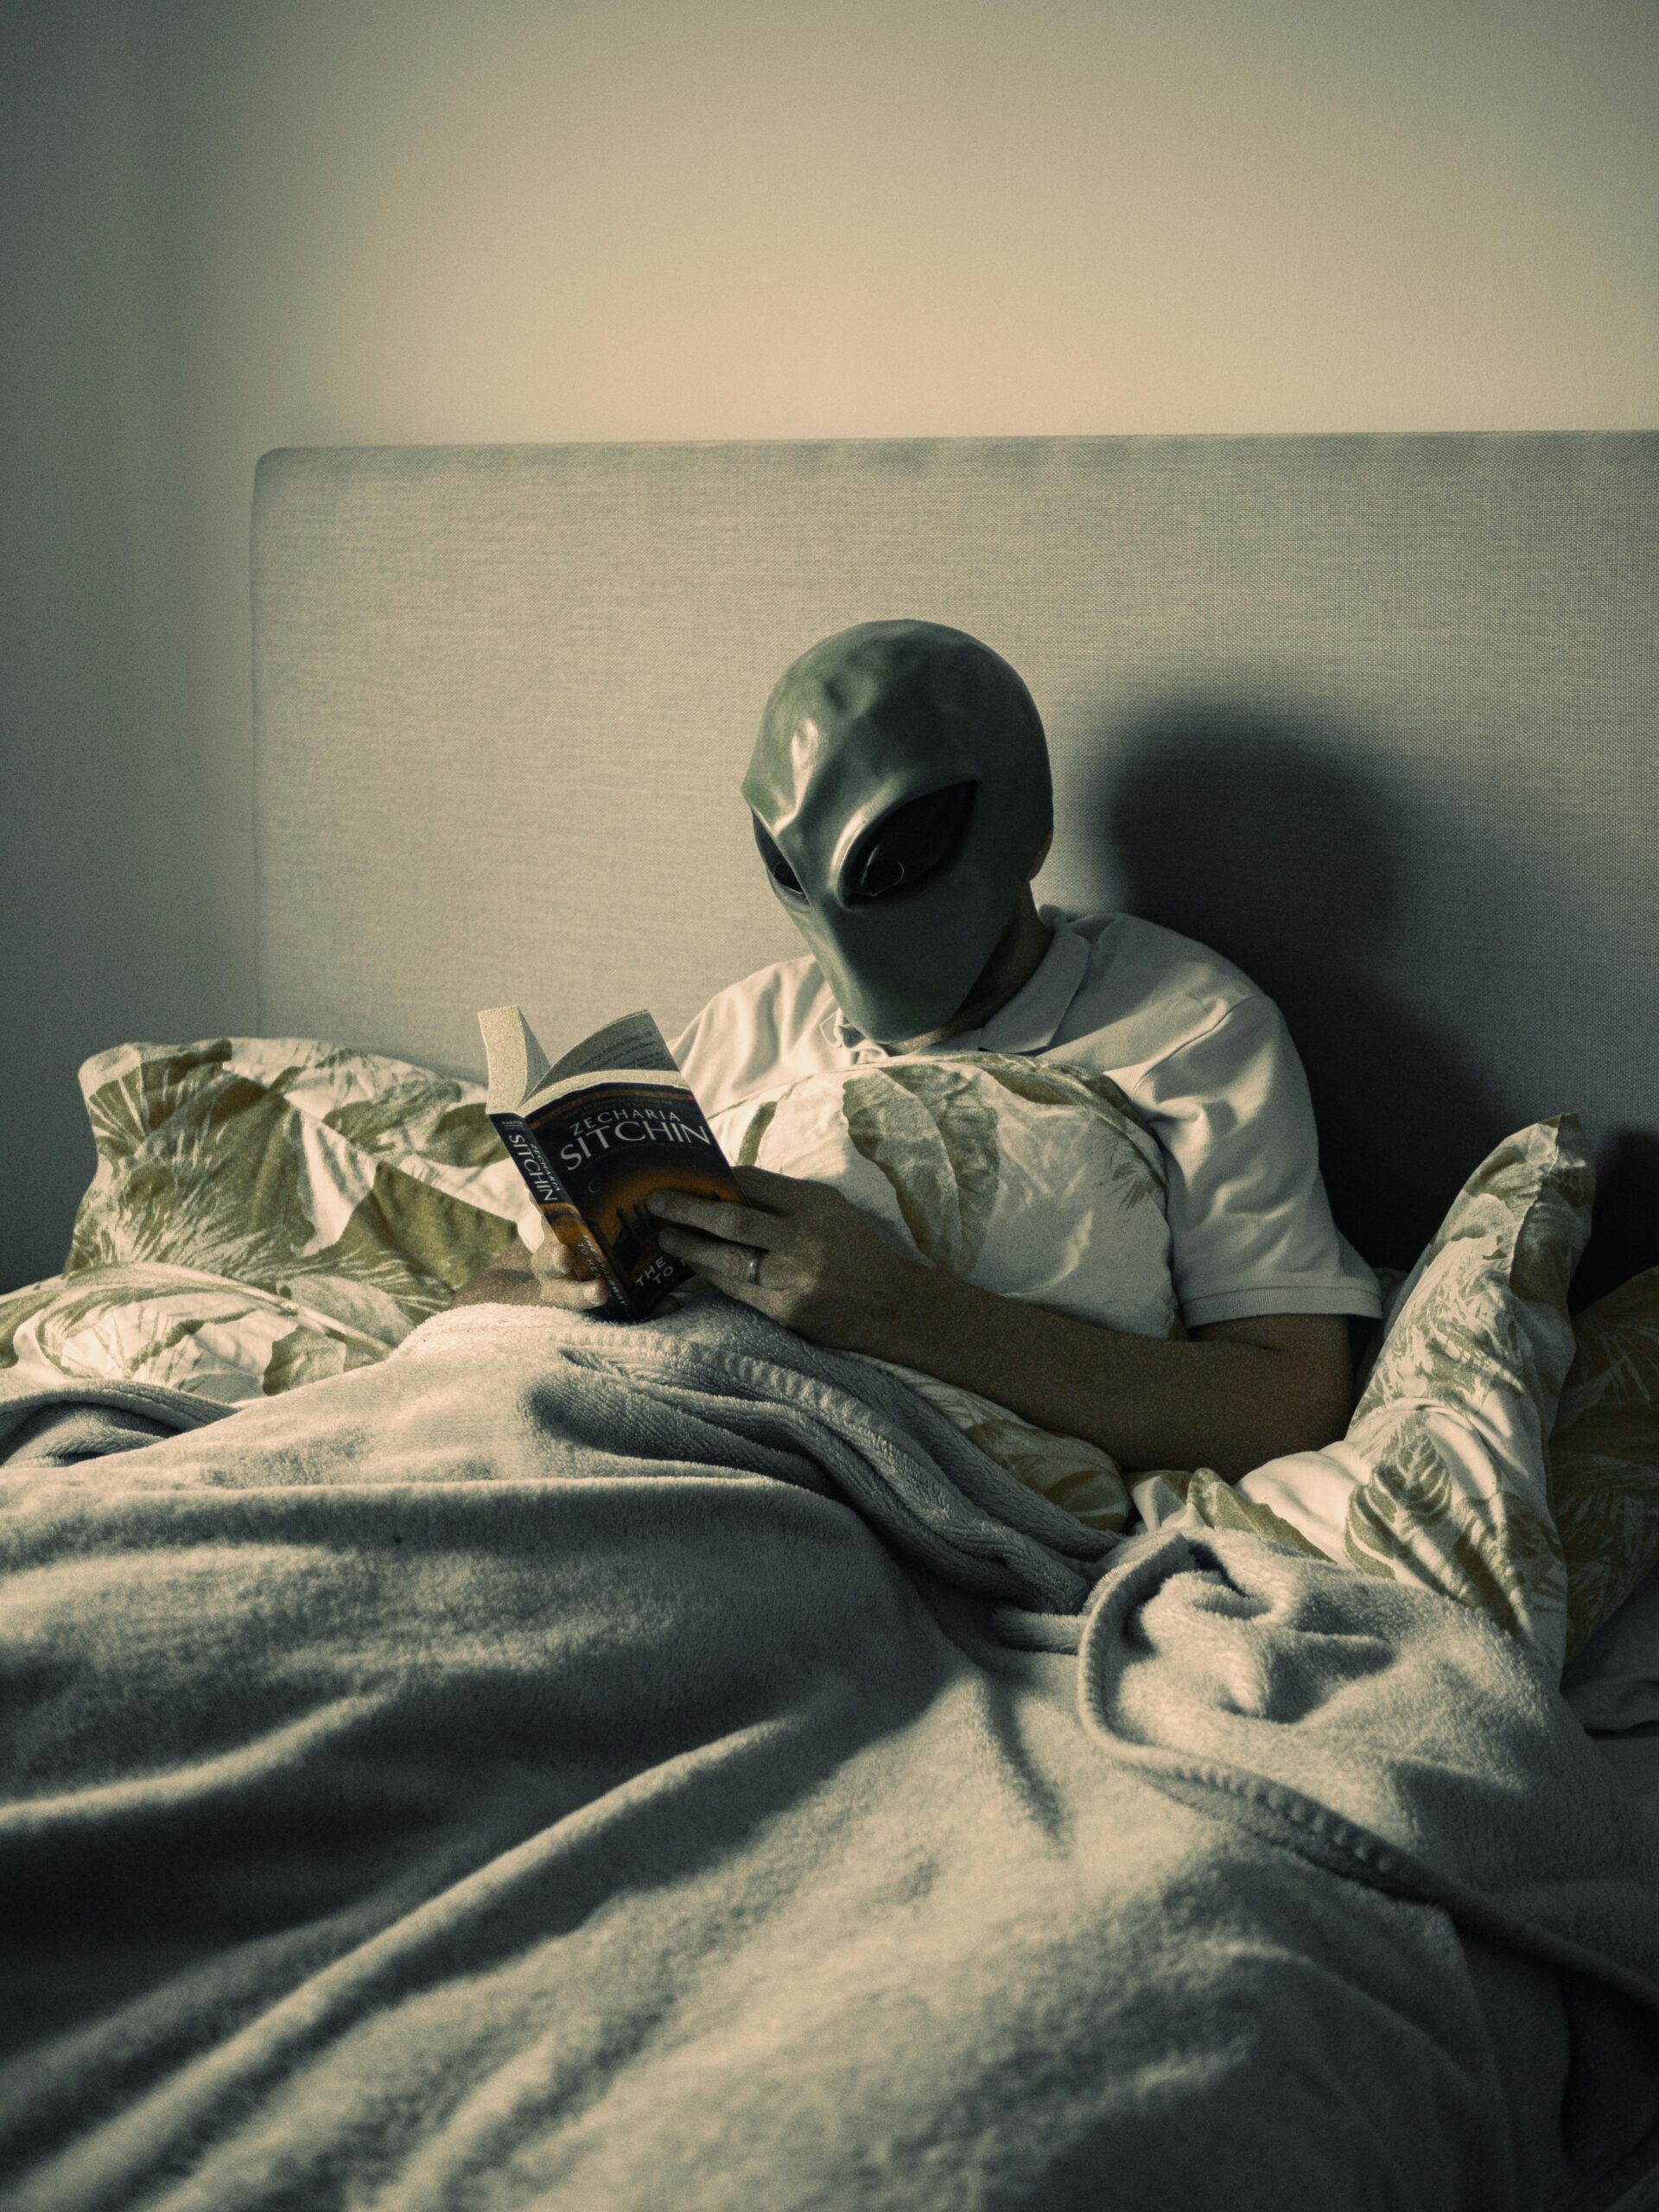 A person in an alien mask reading a book in bed.